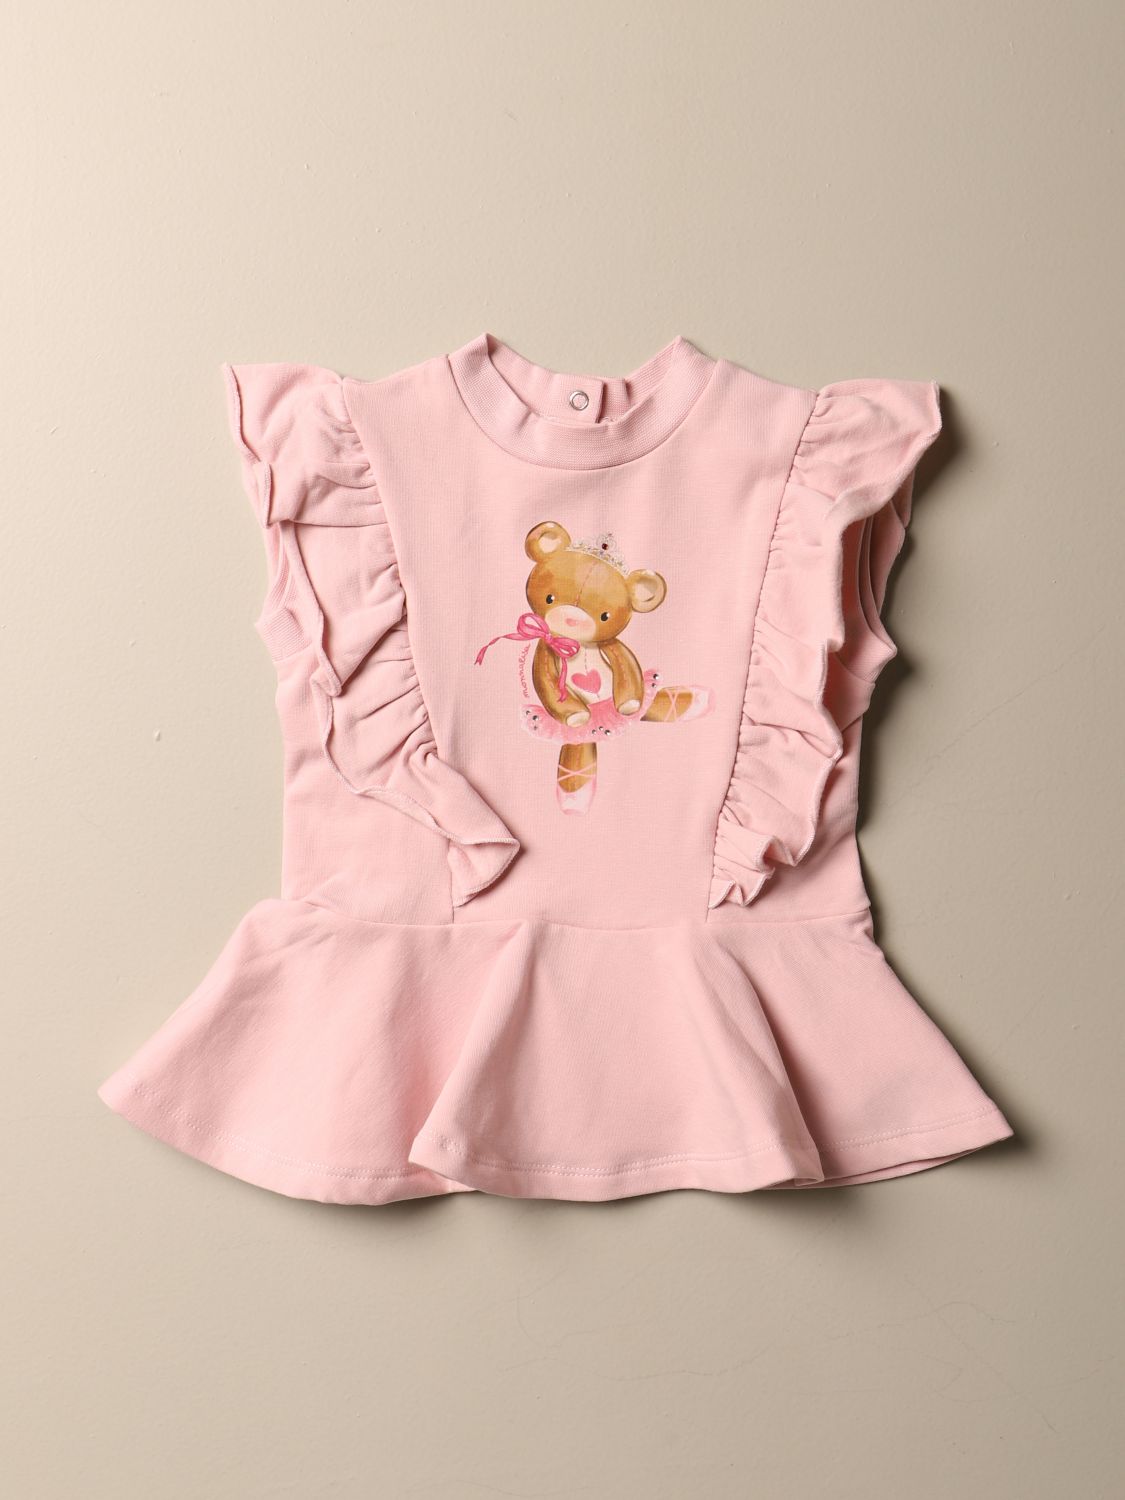 Monnalisa Outlet: dress with teddy bear print - Onion | Romper